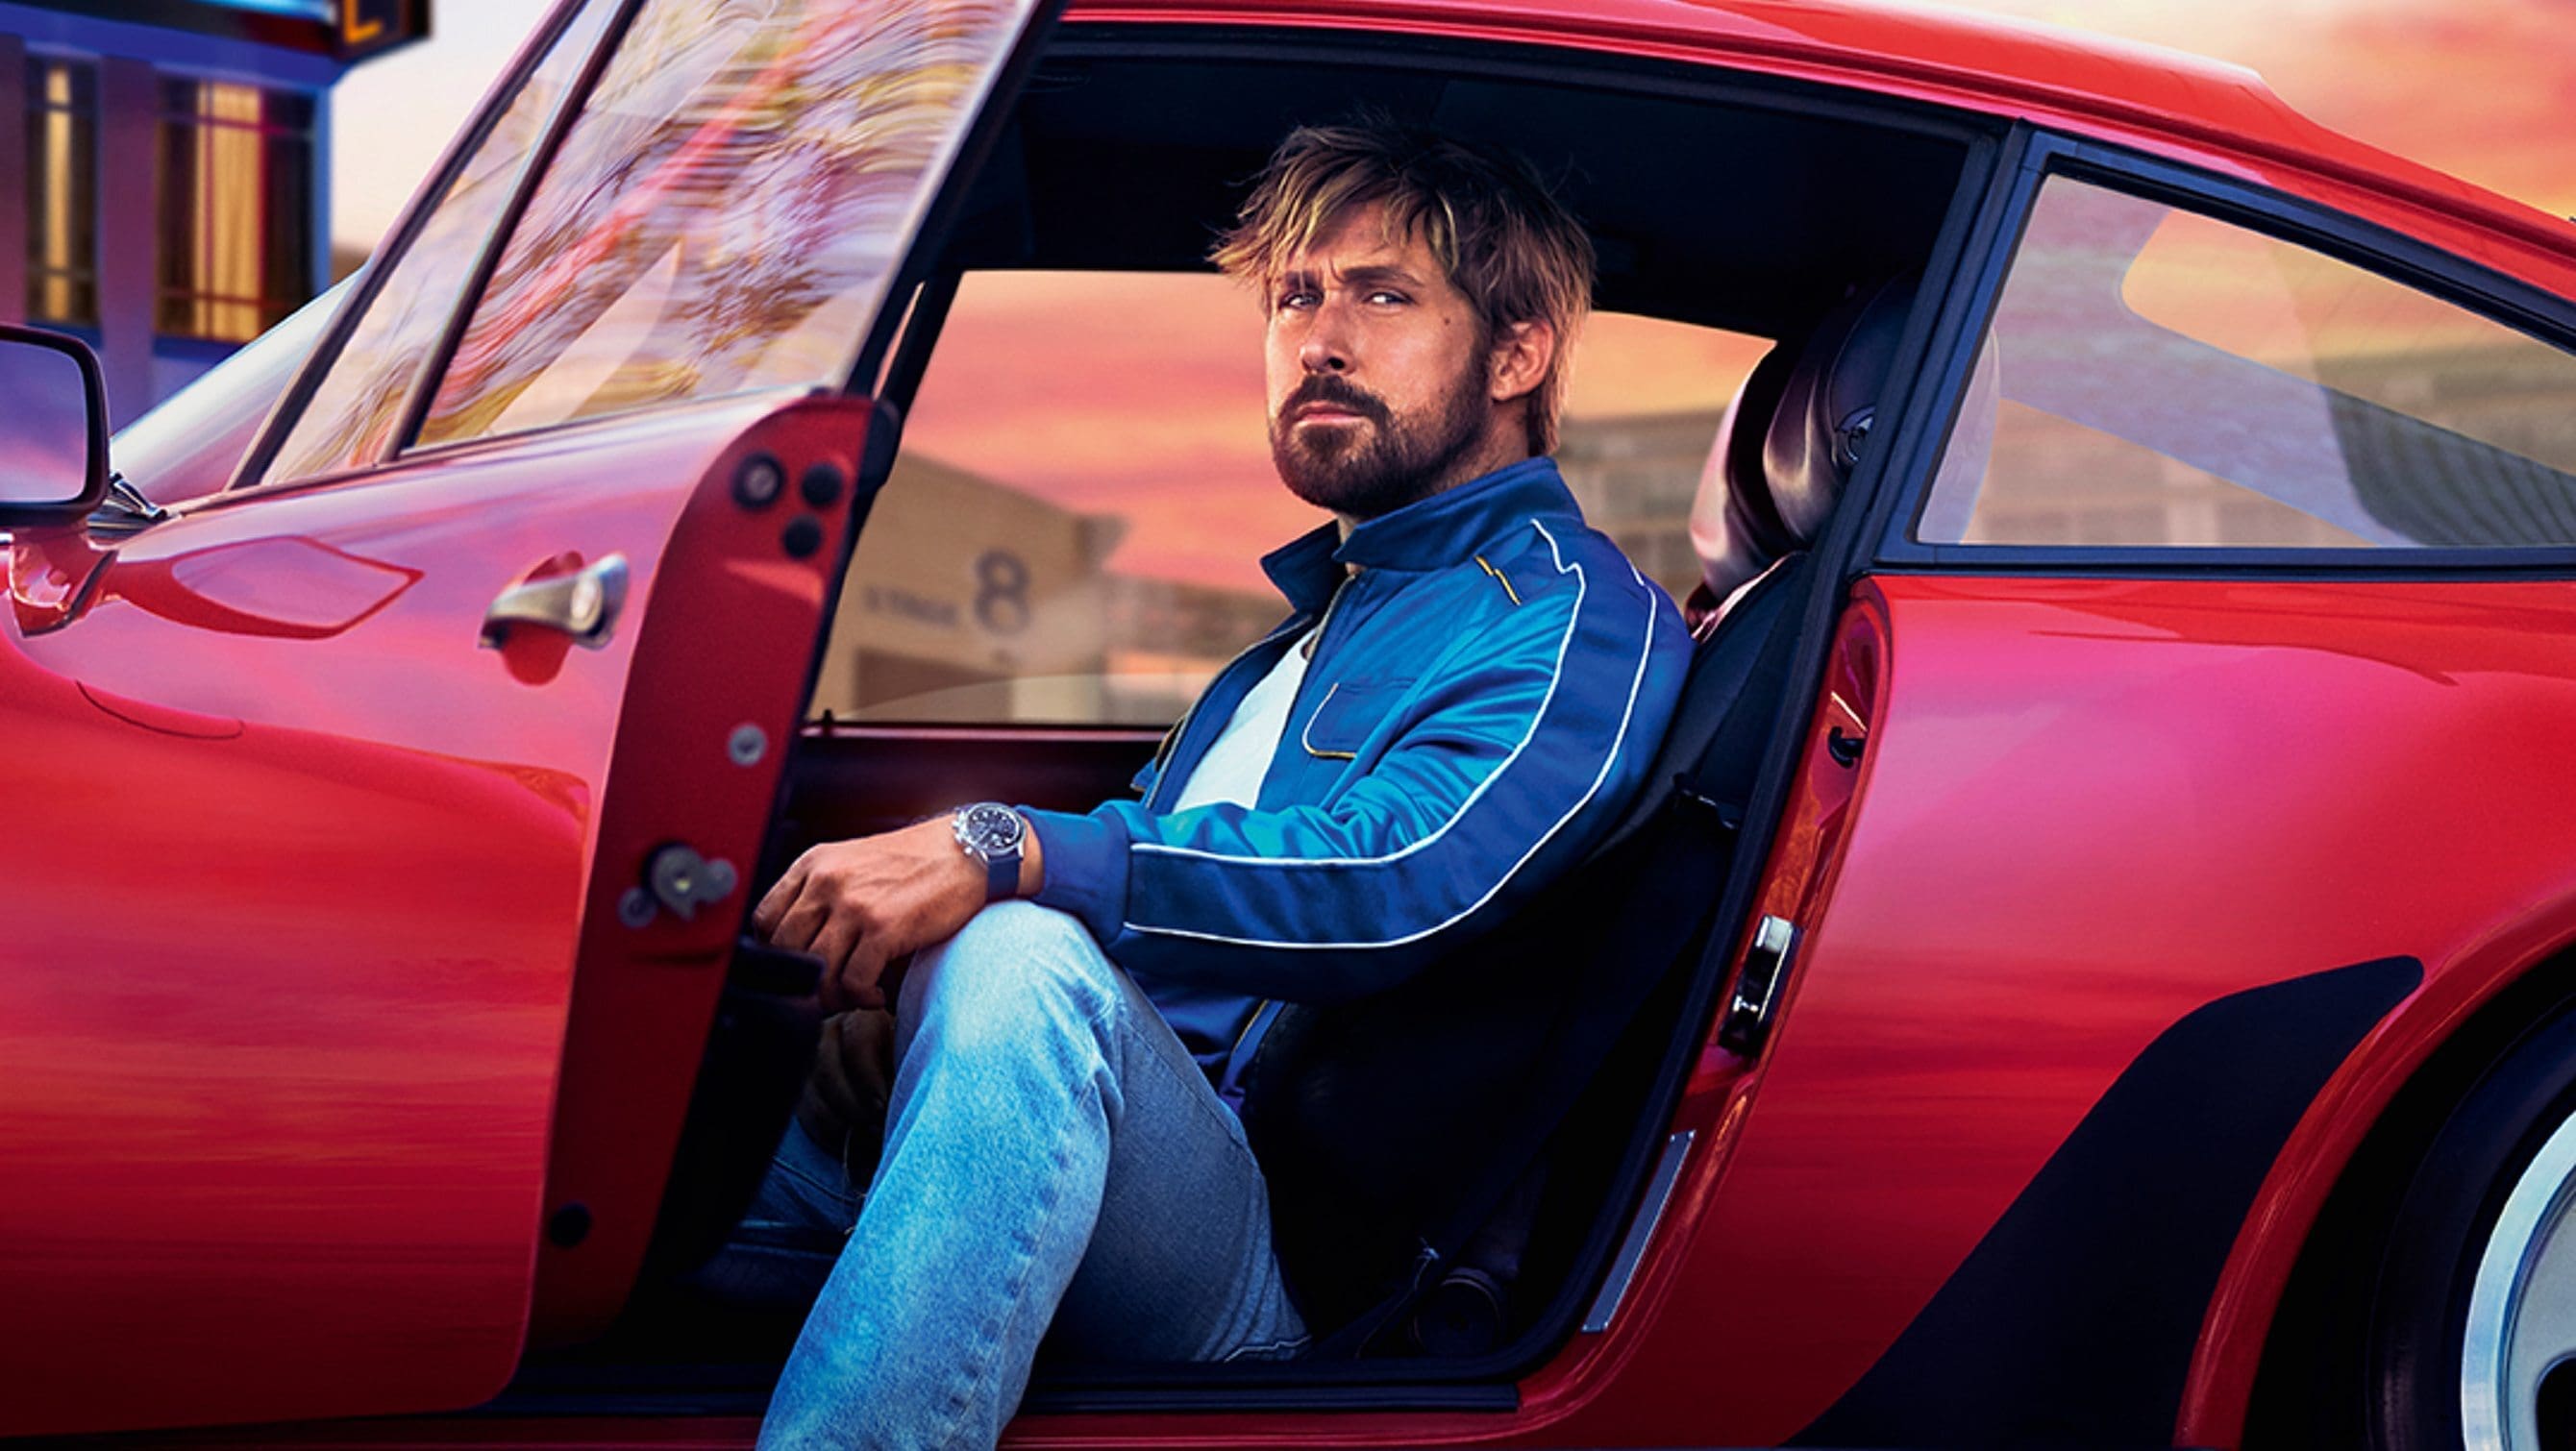 Ryan Gosling commits grand theft auto in The Chase for Carrera